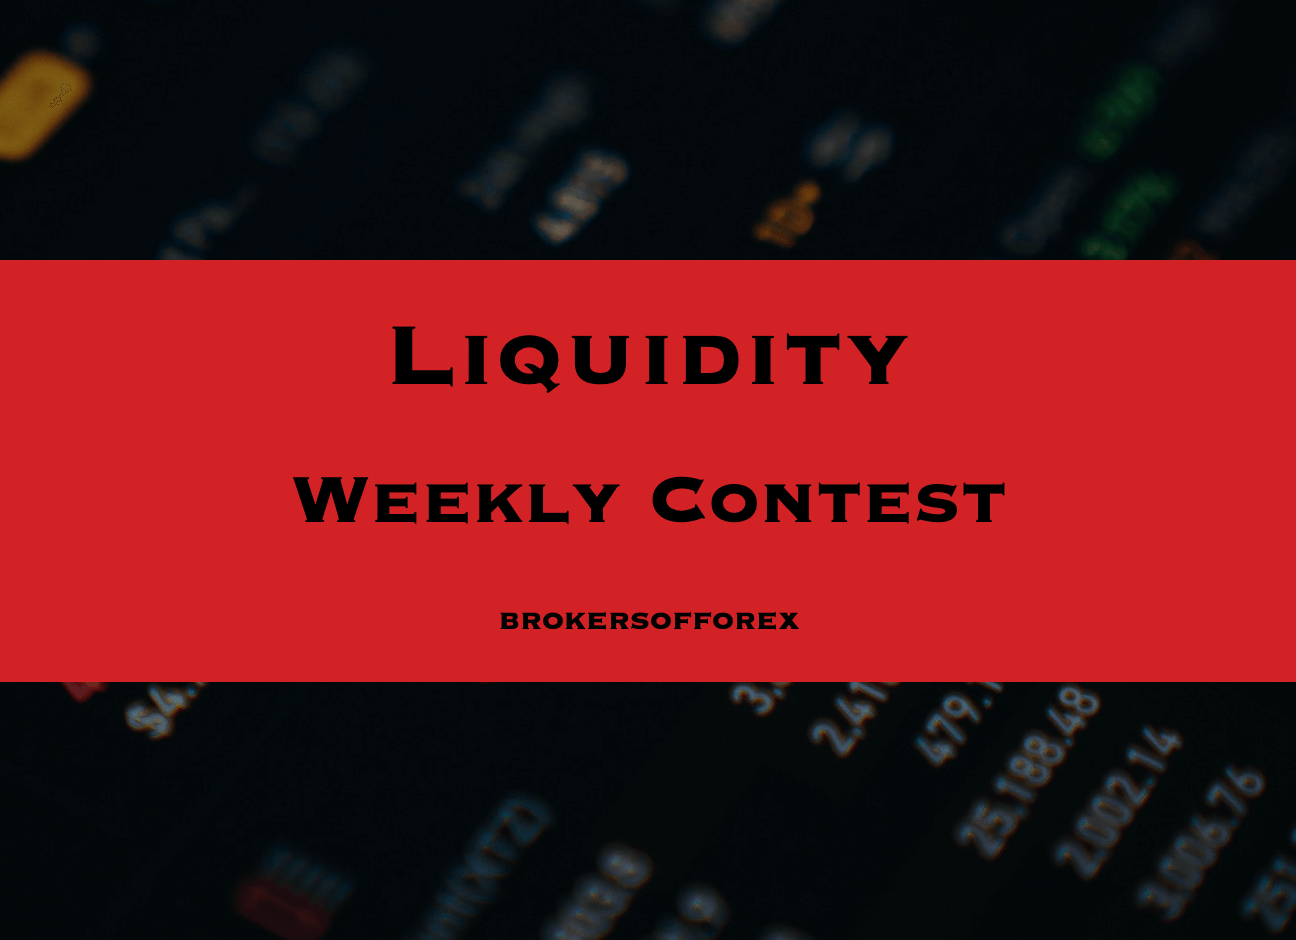 The Liquidity Weekly Live Contest 2023